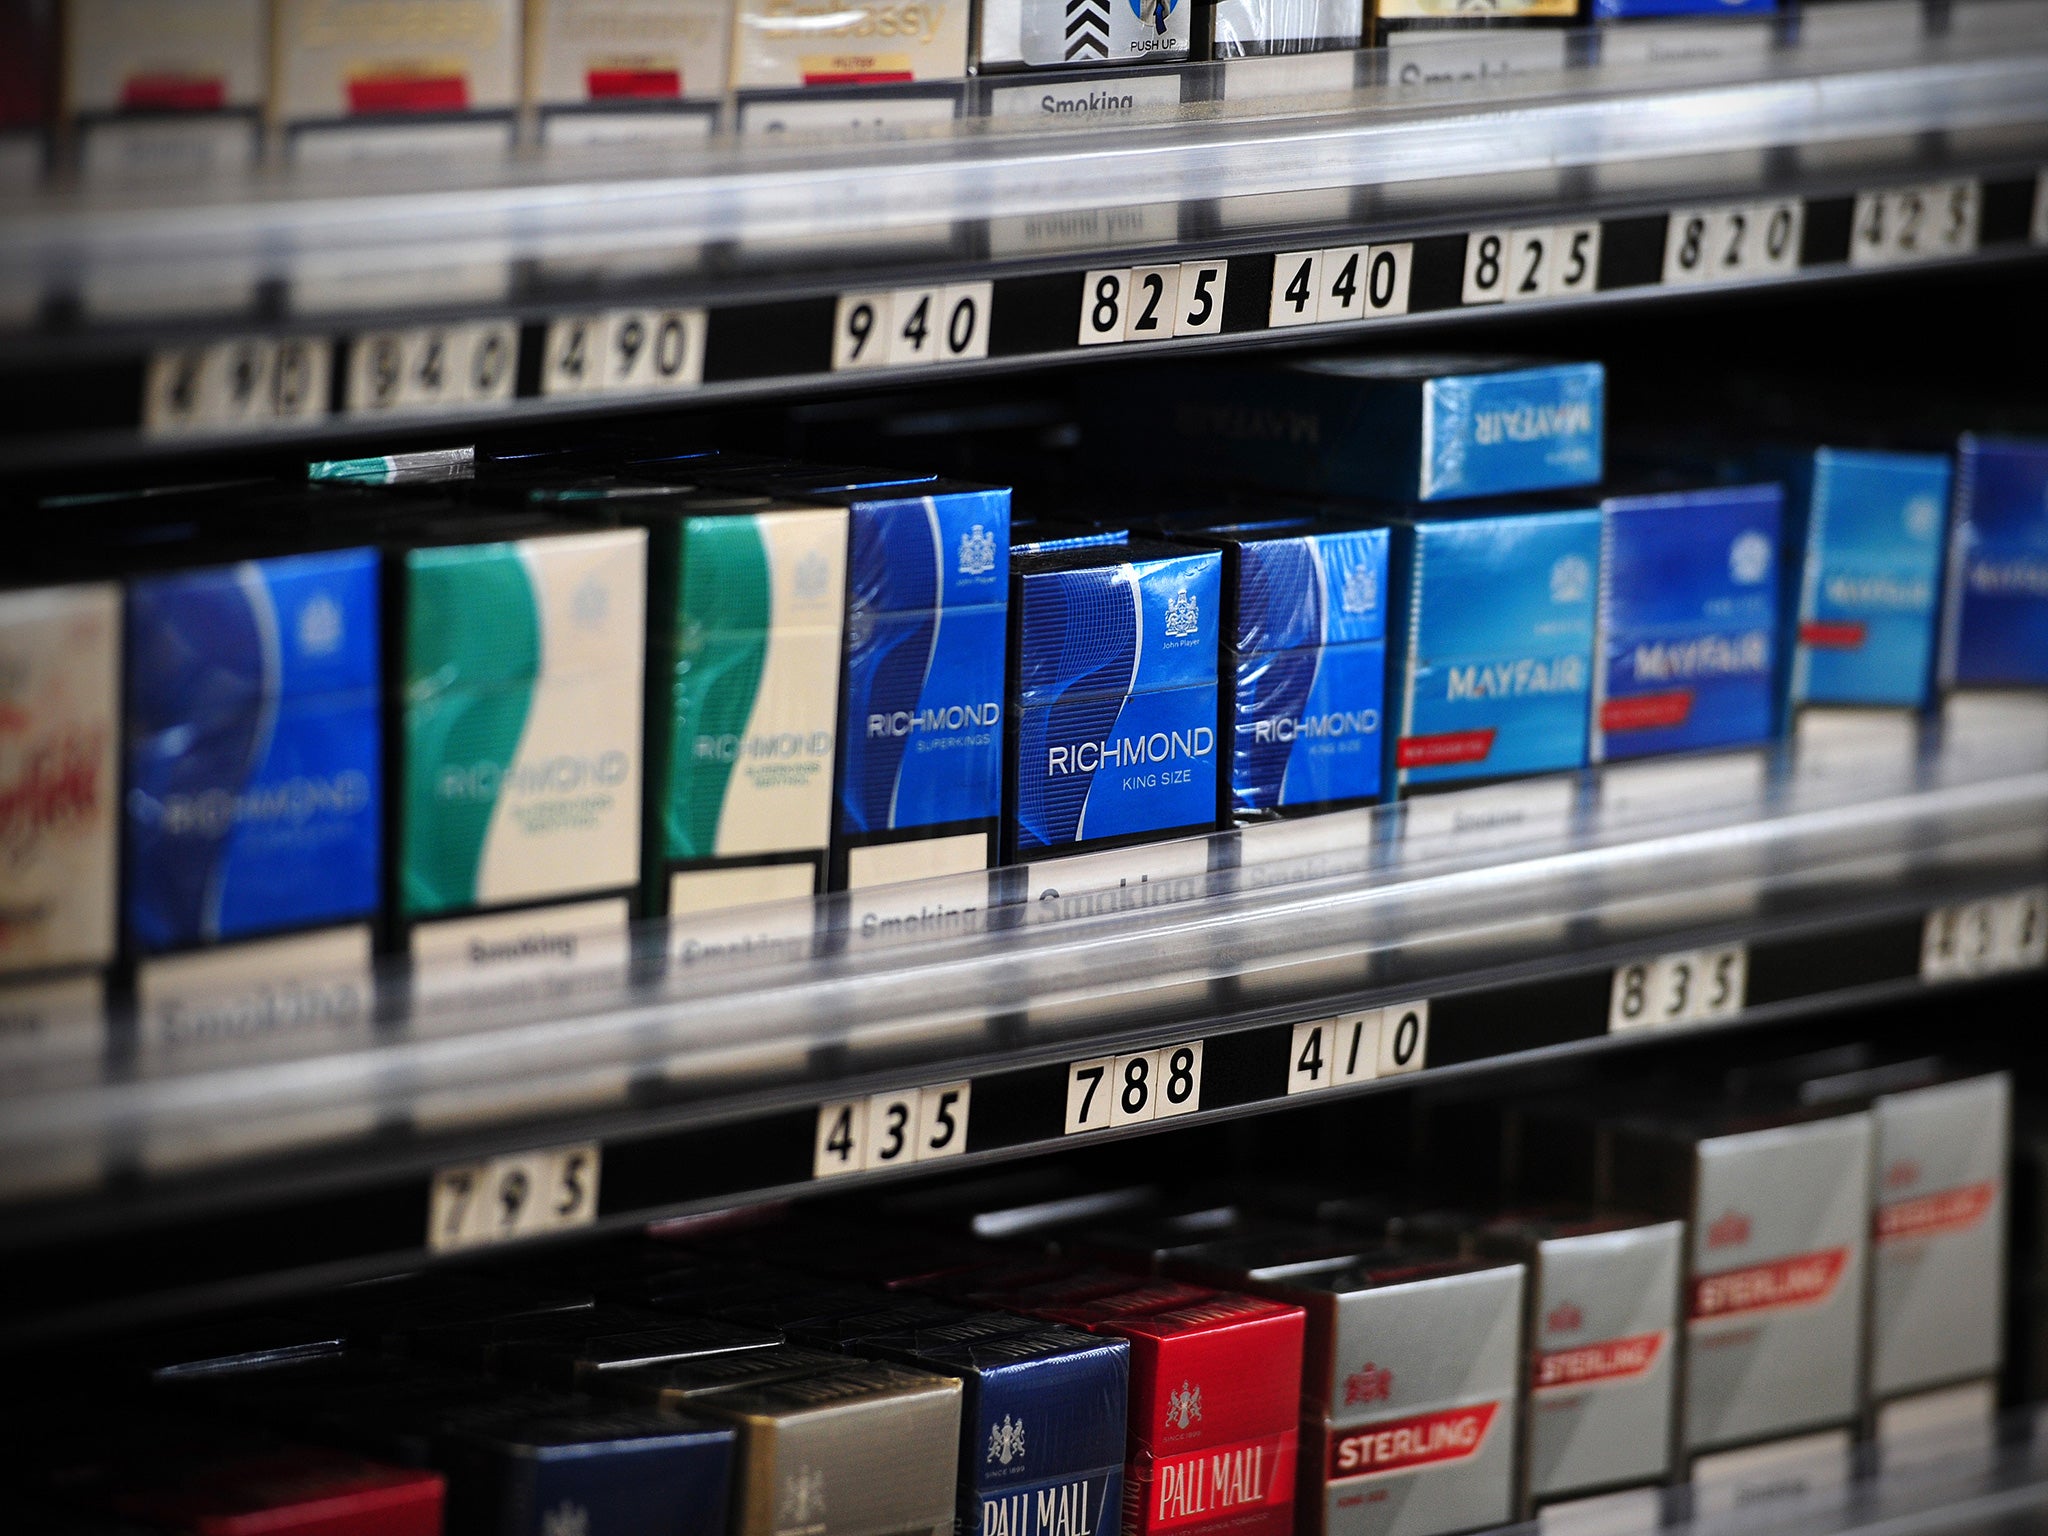 Tobacco companies are seeking compensation over plain packaging laws, set to be introduced in 2016